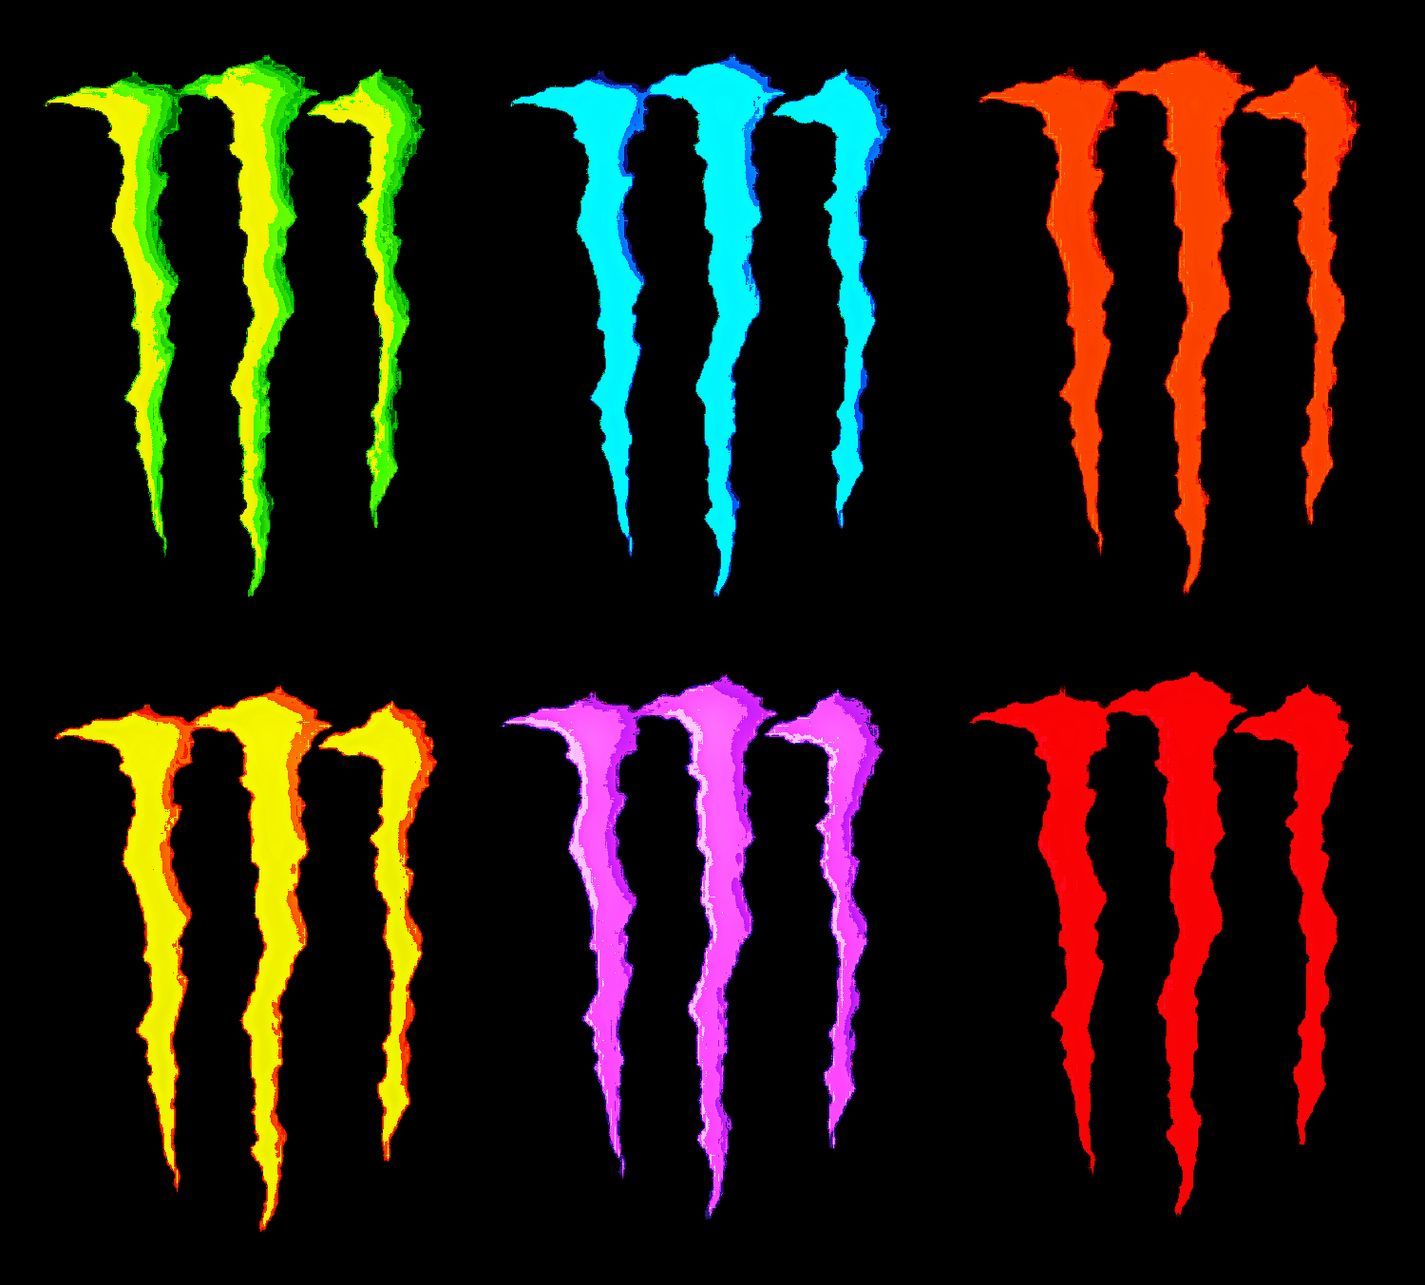 Monster Energy Drink Free Wallpaper download - Download Free Monster Energy  Drink HD Wallpapers to your mobile phone or tablet